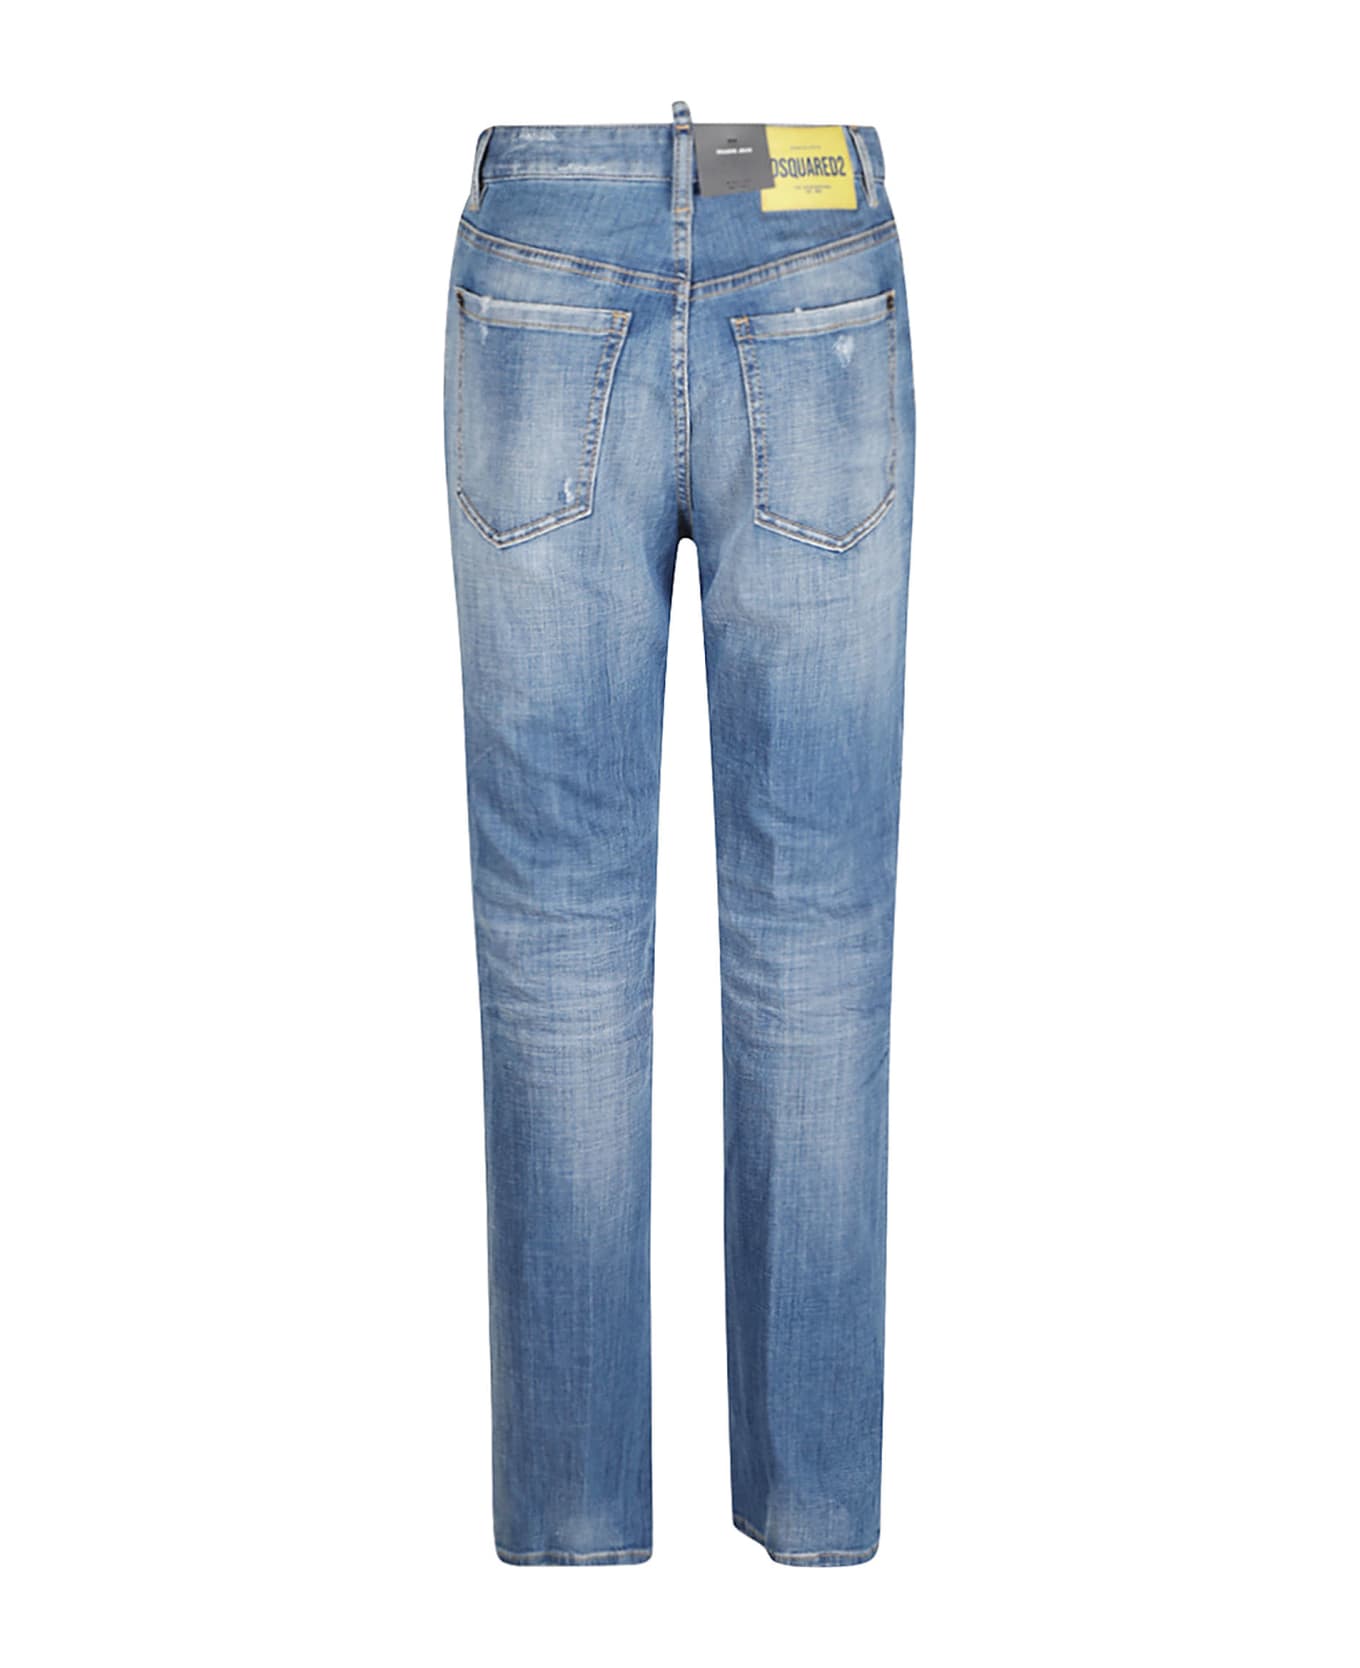 Dsquared2 Roadie Jeans - Navy Blue